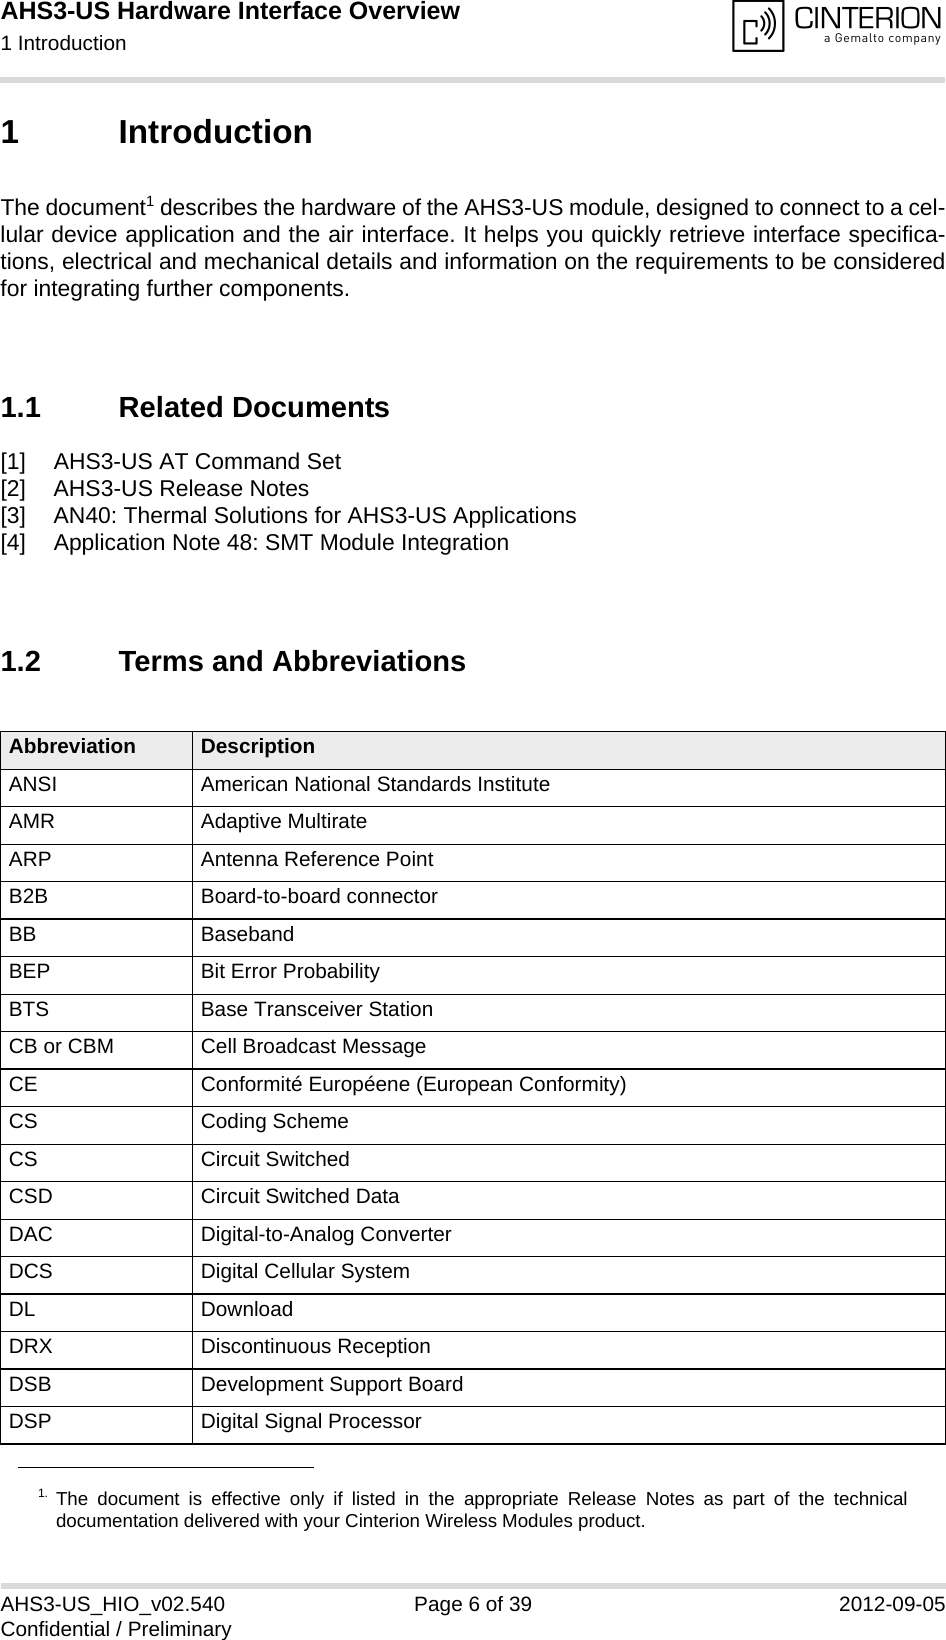 AHS3-US Hardware Interface Overview1 Introduction13AHS3-US_HIO_v02.540 Page 6 of 39 2012-09-05Confidential / Preliminary1 IntroductionThe document1 describes the hardware of the AHS3-US module, designed to connect to a cel-lular device application and the air interface. It helps you quickly retrieve interface specifica-tions, electrical and mechanical details and information on the requirements to be consideredfor integrating further components.1.1 Related Documents[1] AHS3-US AT Command Set[2] AHS3-US Release Notes[3] AN40: Thermal Solutions for AHS3-US Applications [4] Application Note 48: SMT Module Integration 1.2 Terms and Abbreviations1. The document is effective only if listed in the appropriate Release Notes as part of the technicaldocumentation delivered with your Cinterion Wireless Modules product.Abbreviation DescriptionANSI American National Standards InstituteAMR Adaptive MultirateARP Antenna Reference PointB2B Board-to-board connectorBB BasebandBEP Bit Error ProbabilityBTS Base Transceiver StationCB or CBM Cell Broadcast MessageCE Conformité Européene (European Conformity)CS Coding SchemeCS Circuit SwitchedCSD Circuit Switched DataDAC Digital-to-Analog ConverterDCS Digital Cellular SystemDL DownloadDRX Discontinuous ReceptionDSB Development Support BoardDSP Digital Signal Processor